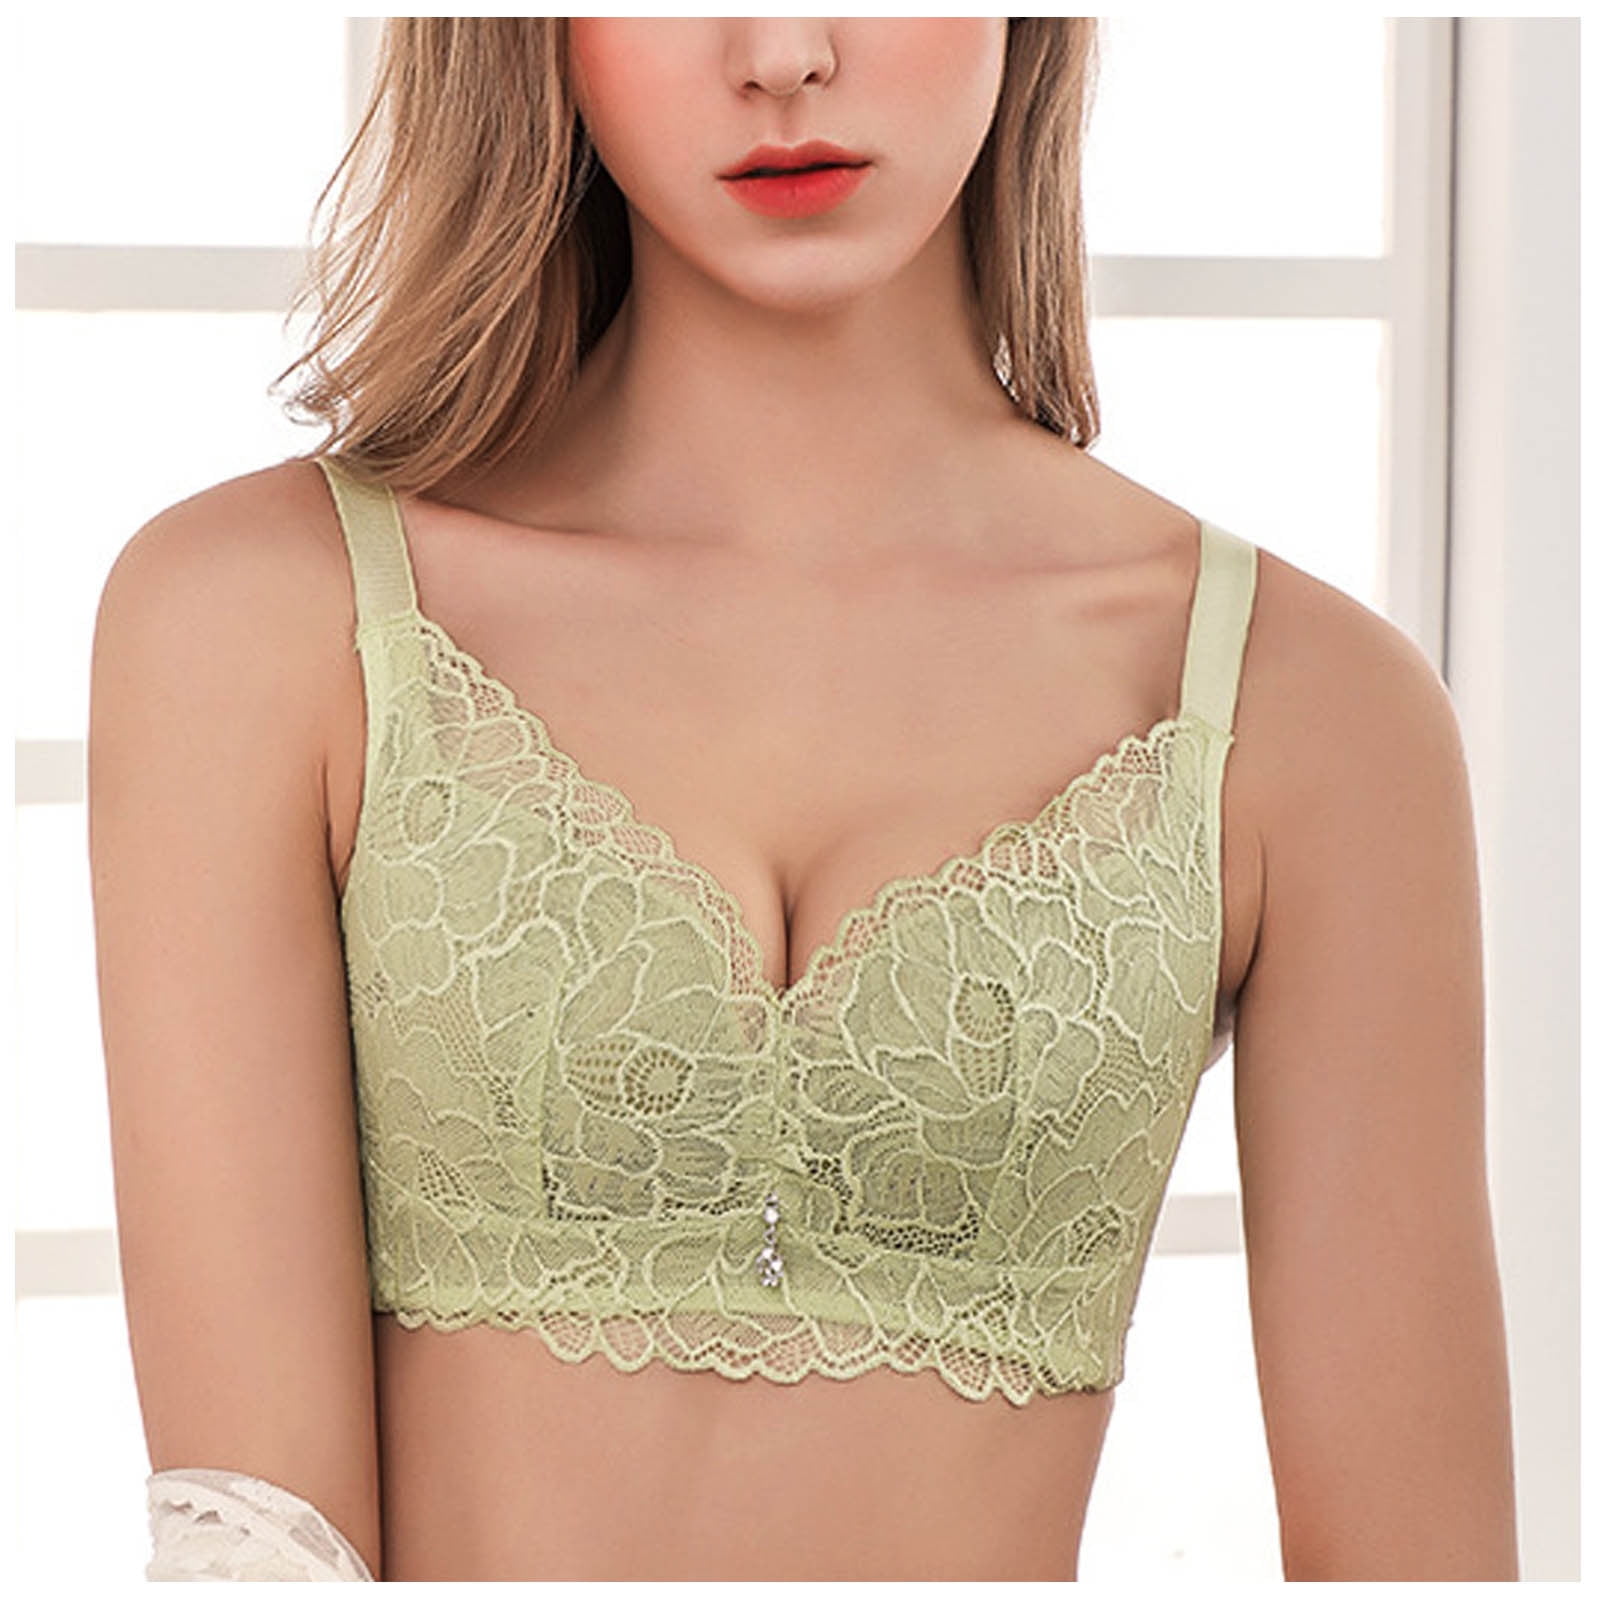 Nursing Bra Women's Plus Size Floral Lace Bra No Steel Ring Push Up  Underwear Vest-Style Sleep Bra Wireless Bras With Support And Lift on  Clearance 